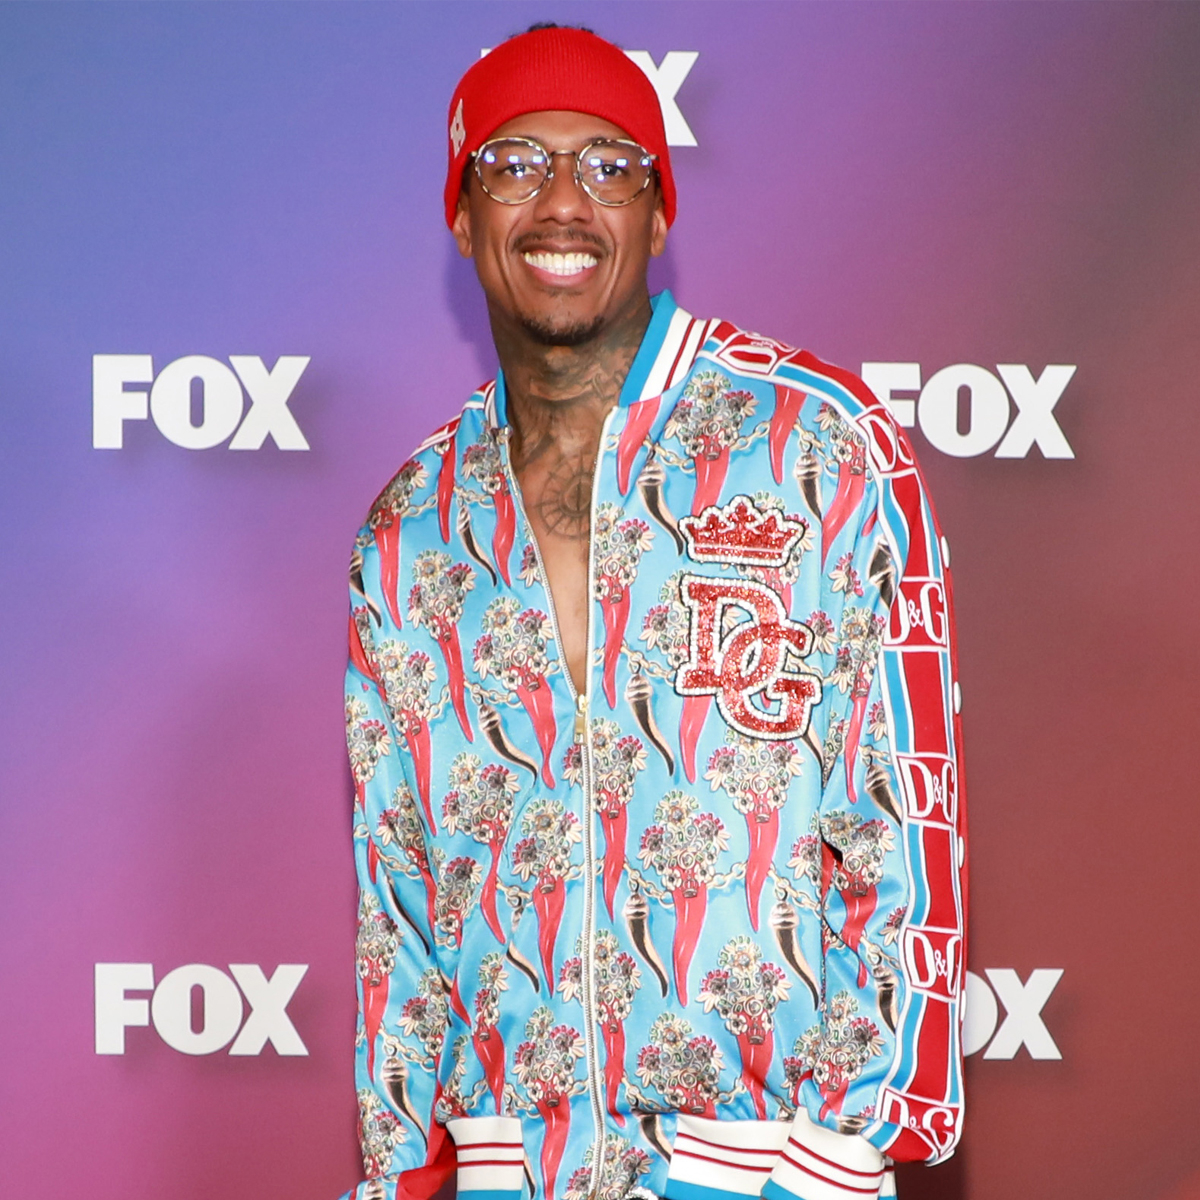 Nick Cannon’s Family Album: Your Guide to His 12 Kids and Their Moms